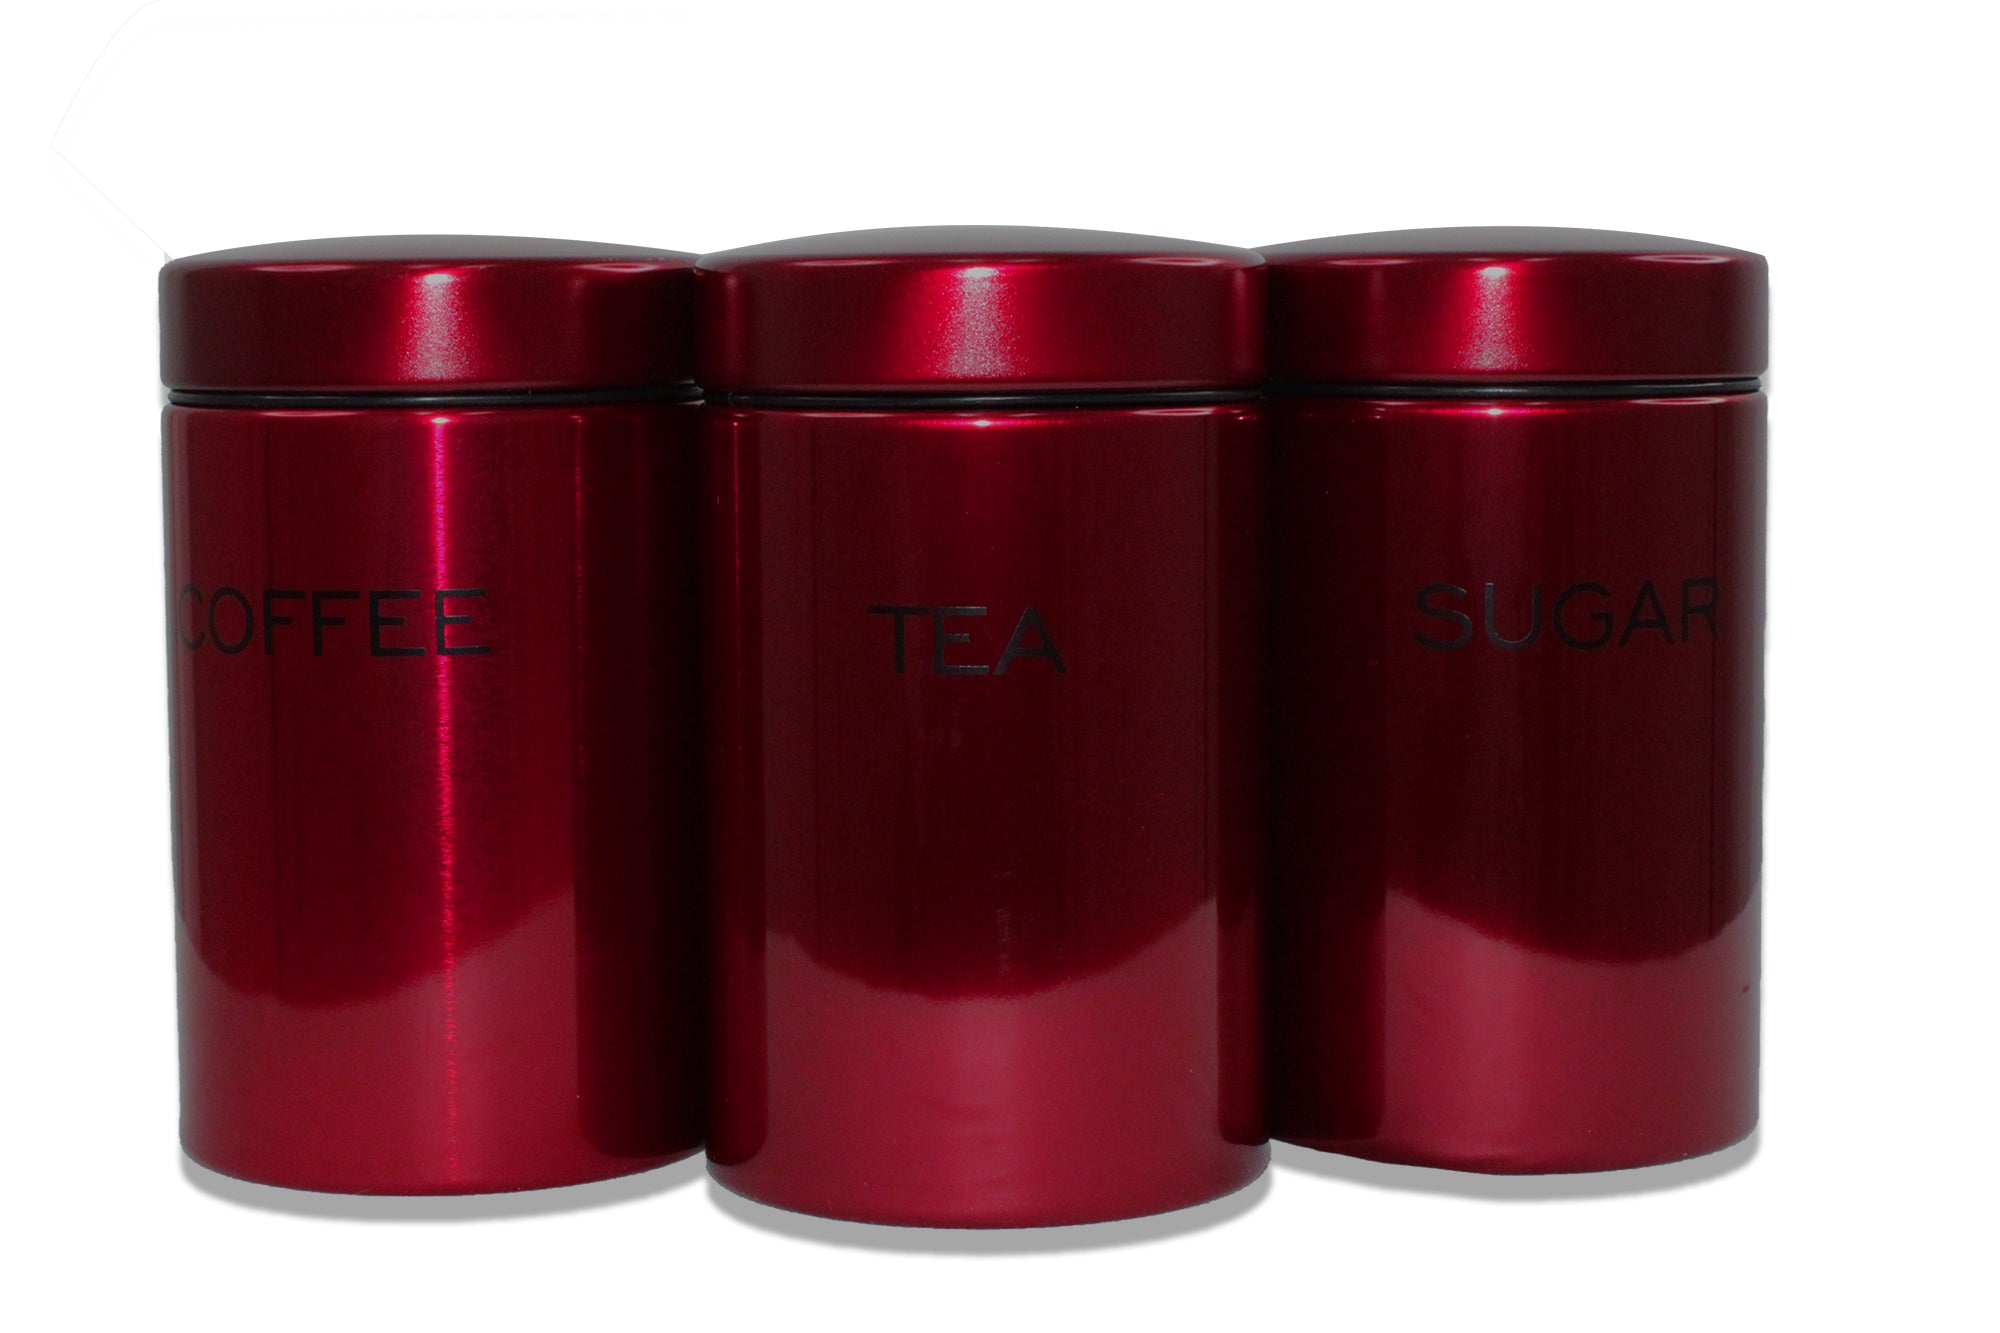 3 Piece Glossy Stainless Steel Coffee, Tea & Sugar Canister Set